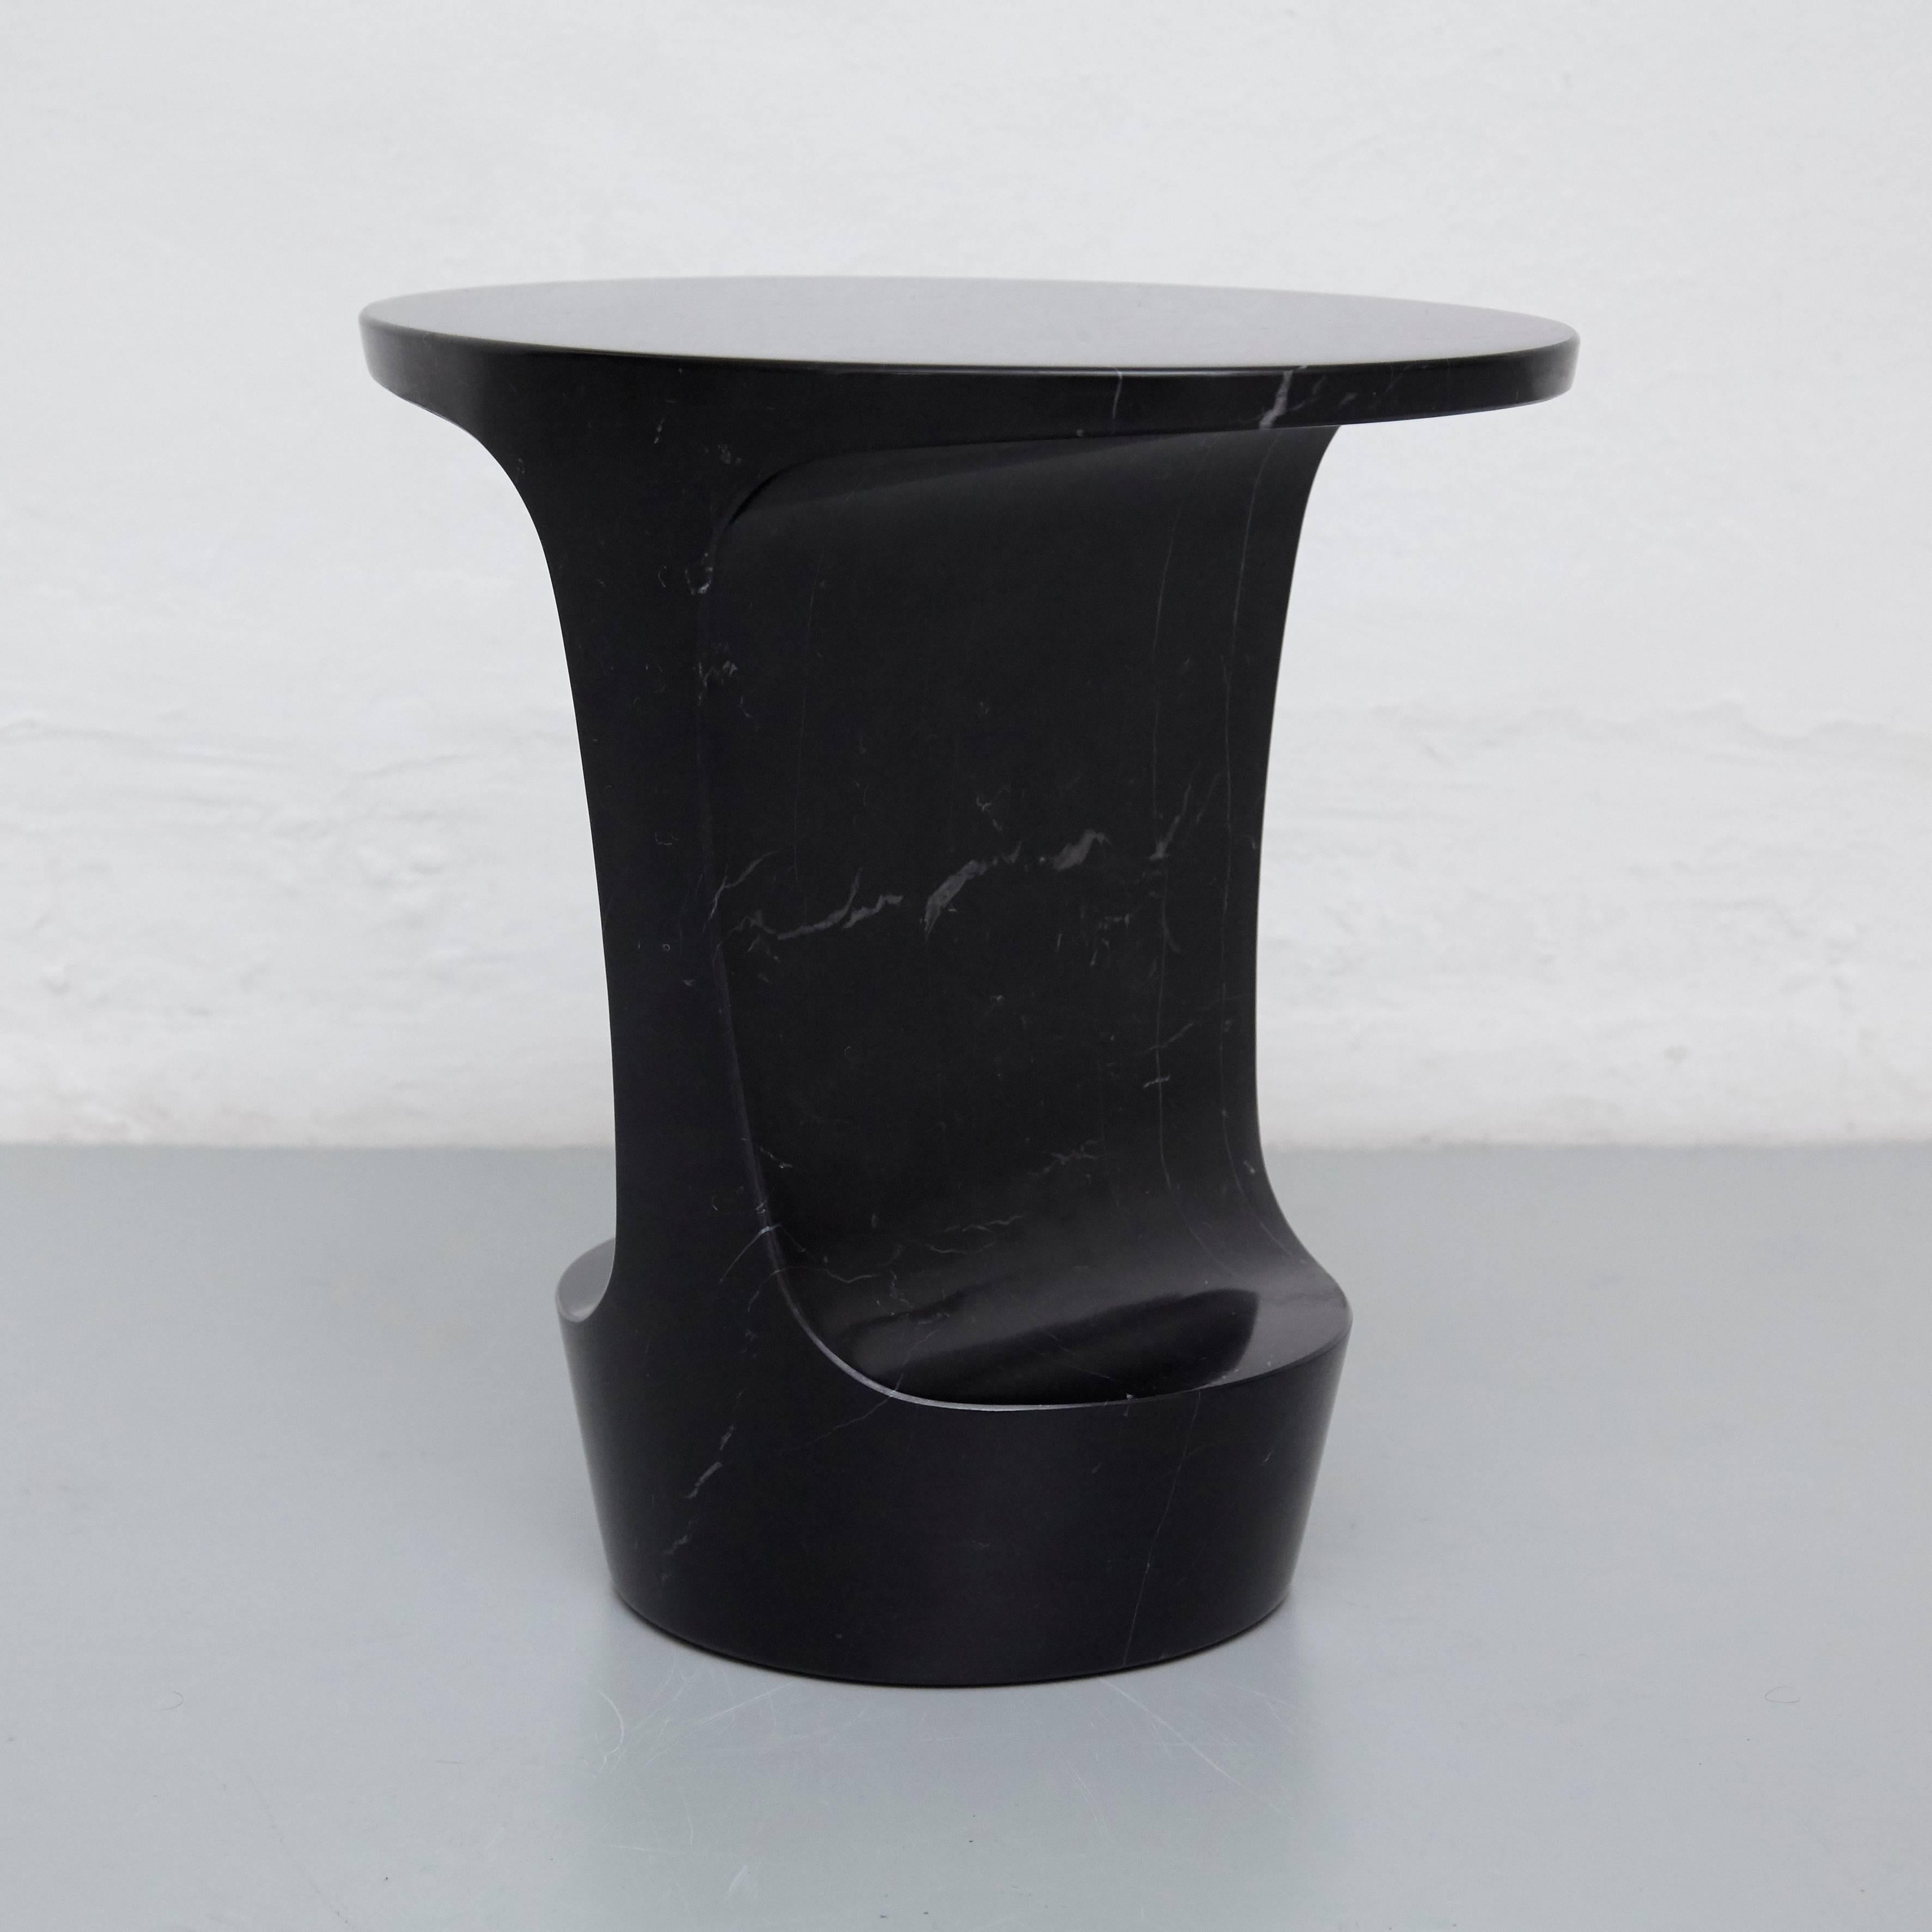 Side table designed by Adolfo Abejon.

Material:
Marquina marble or Carrara marble.

Finish:
Artisan polished.

Colors:
Marquina black or Carrara white.

Dimensions:
42 × 32 × 43 cm (L × W × H).

The marble of the piece will be